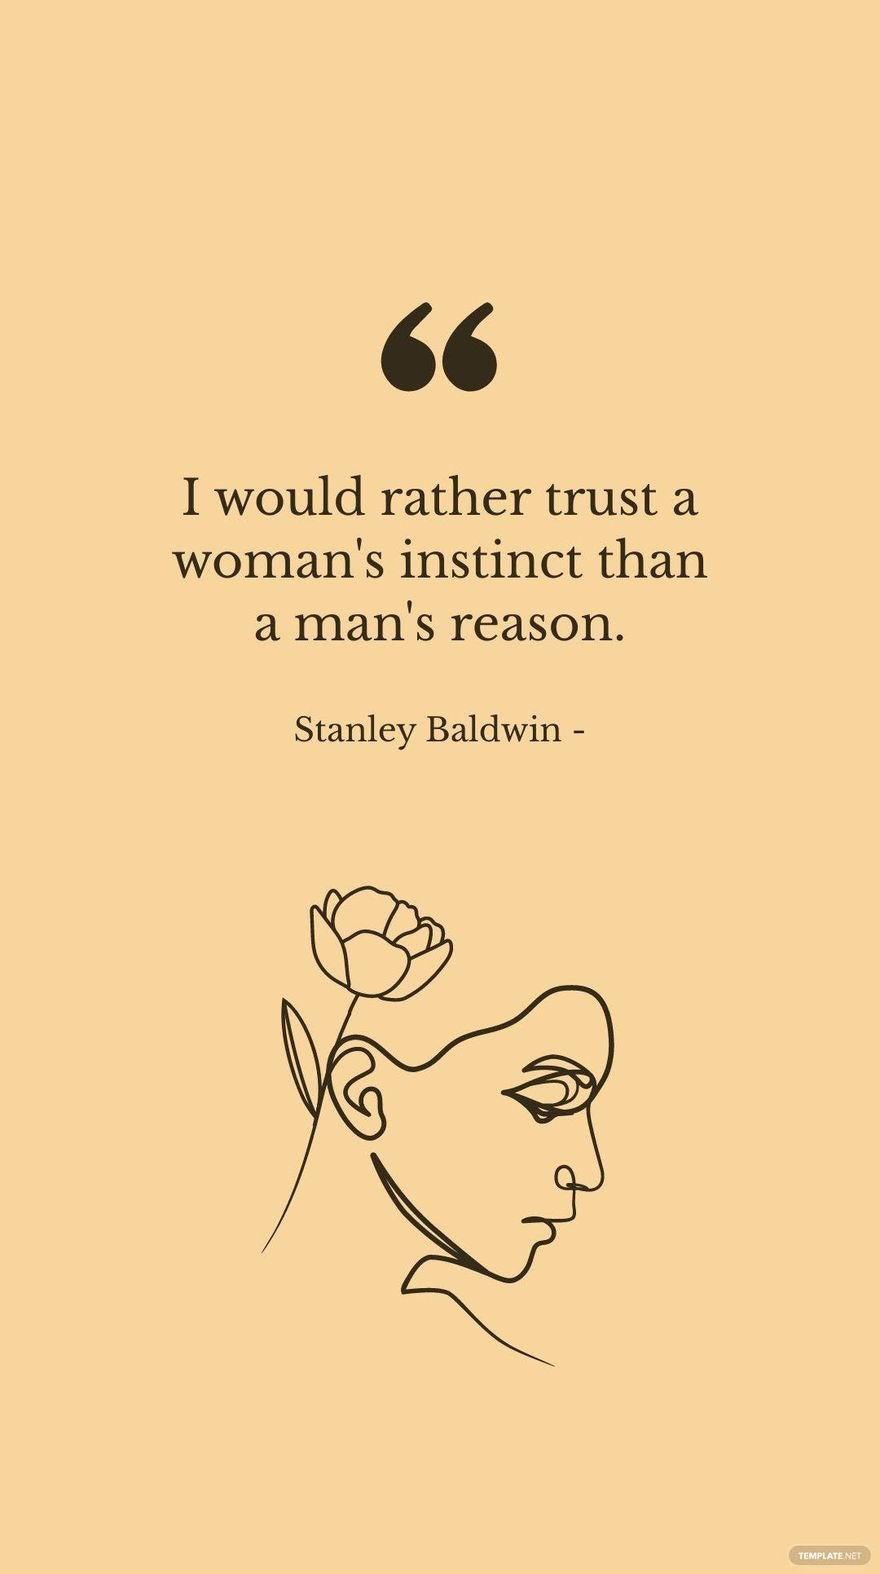 Free Stanley Baldwin - I would rather trust a woman's instinct than a man's reason. in JPG